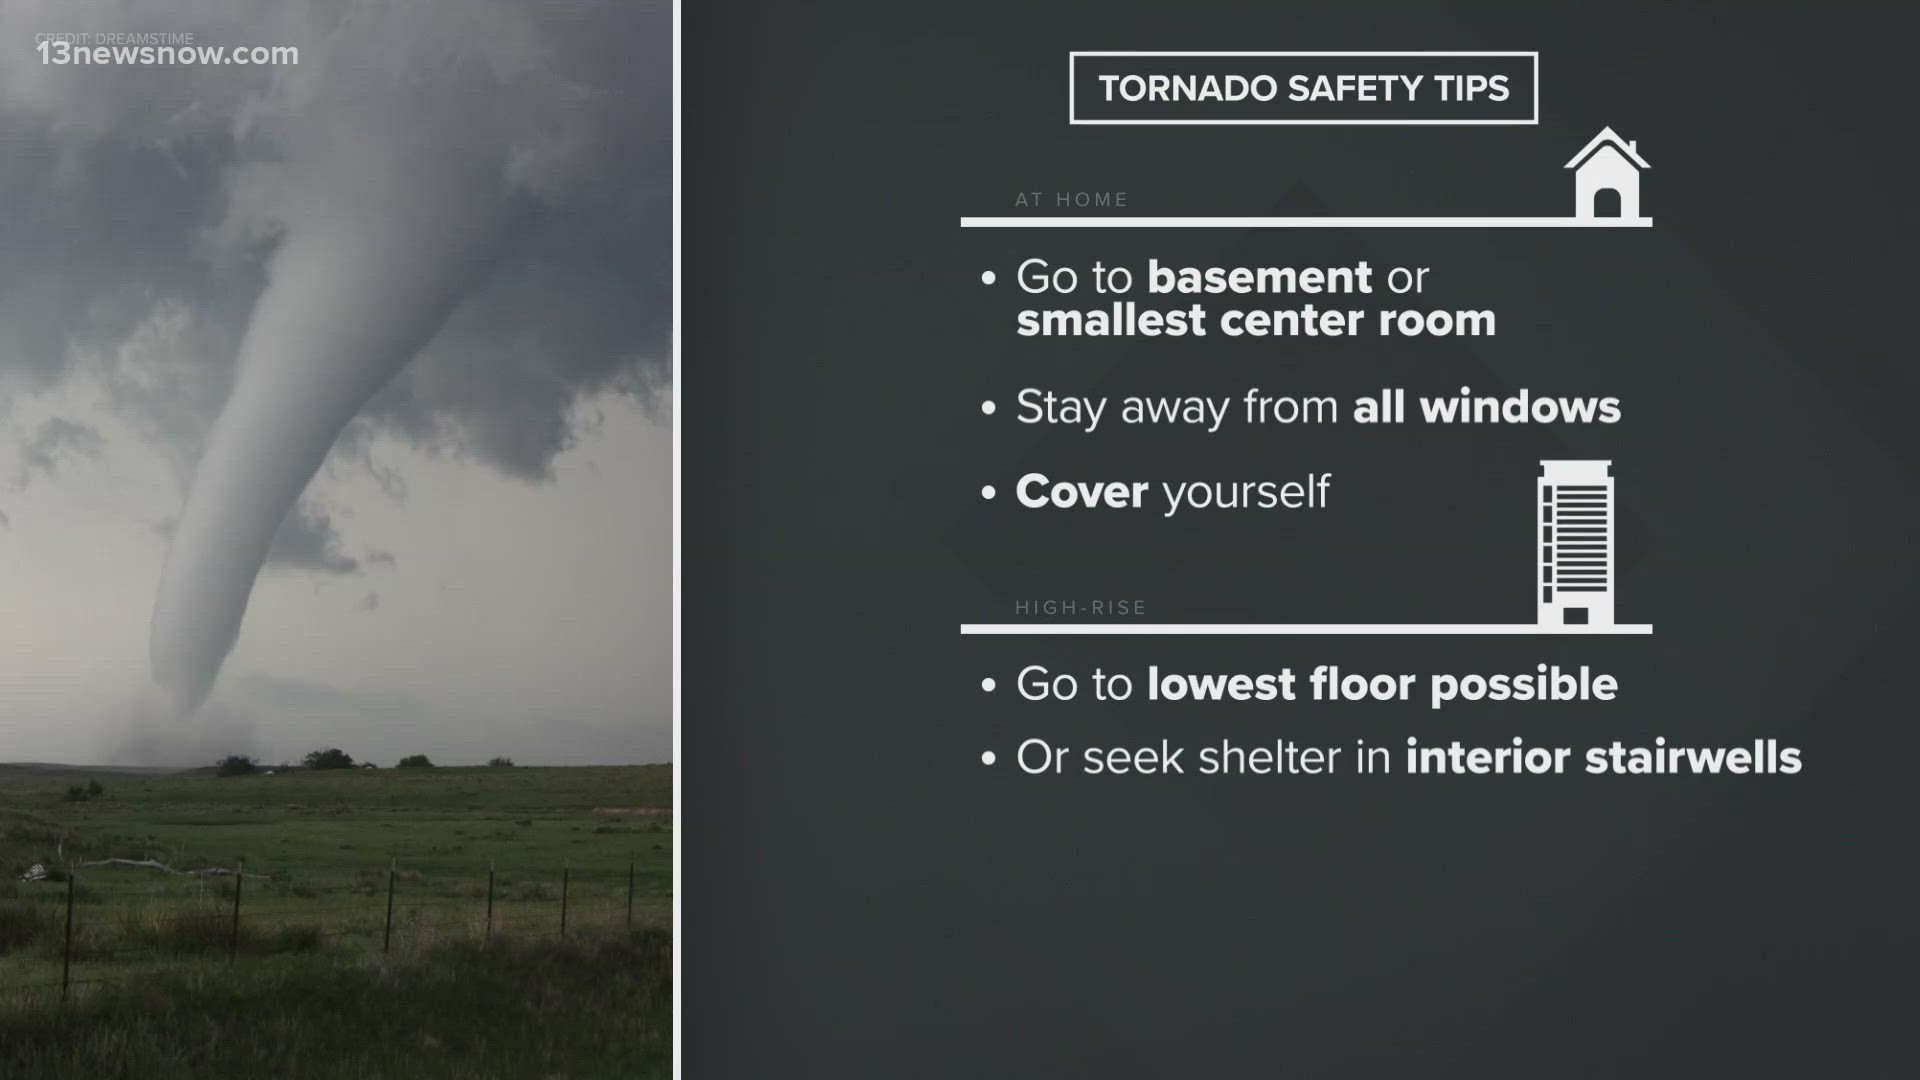 With the potential for severe storms and possible tornado warnings and watches, make sure you know what to do to stay safe.